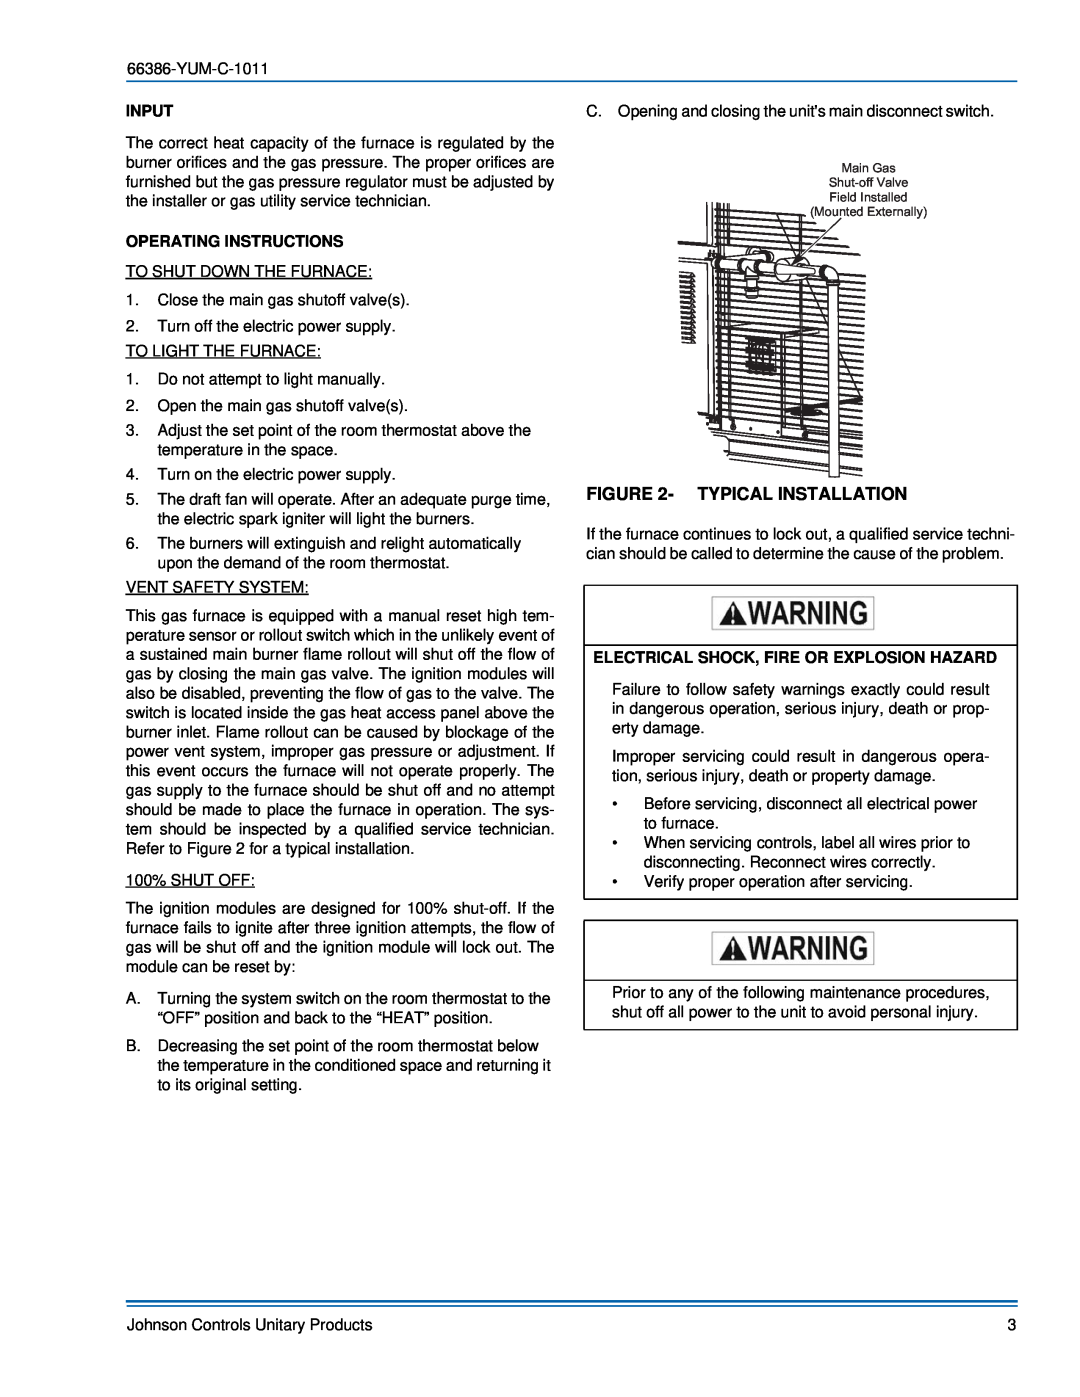 York 66386-YUM-C-1011 Typical Installation, Input, Operating Instructions, Electrical Shock, Fire Or Explosion Hazard 